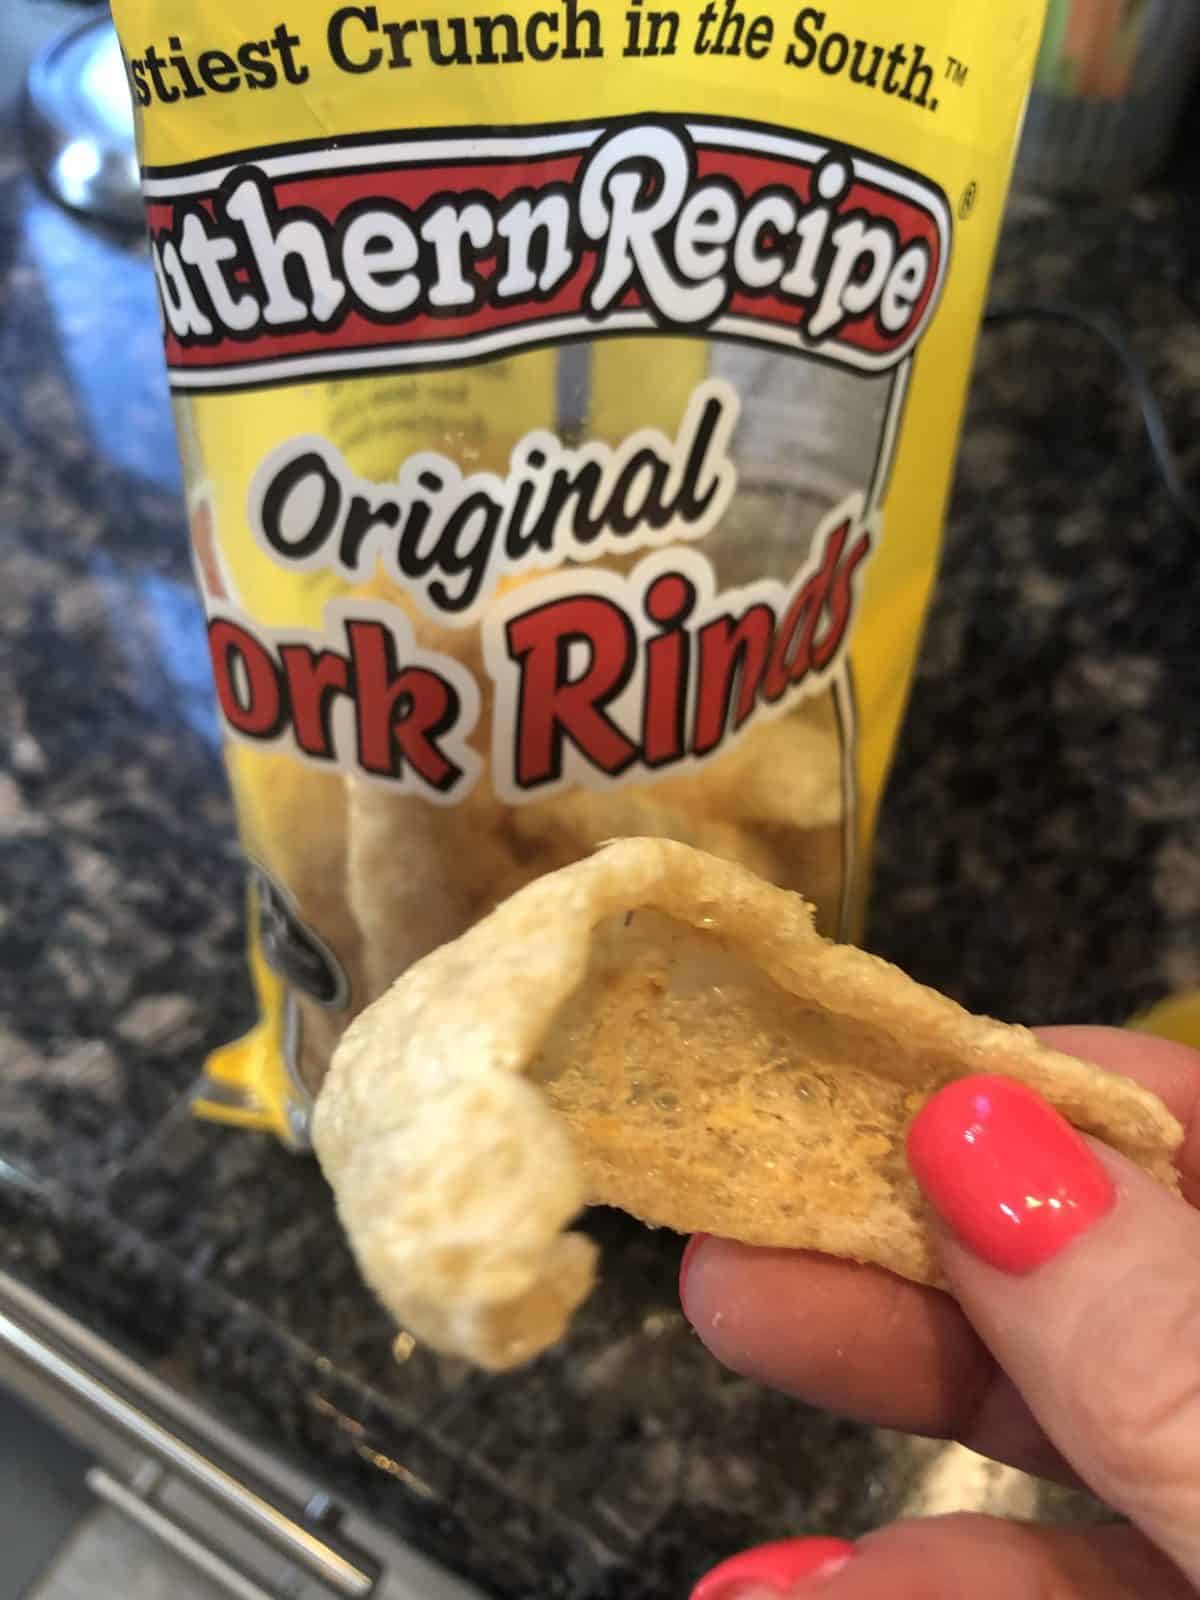 A hand holding a Pork Rind in front of a bag of Southern Recipe Original Pork Rinds